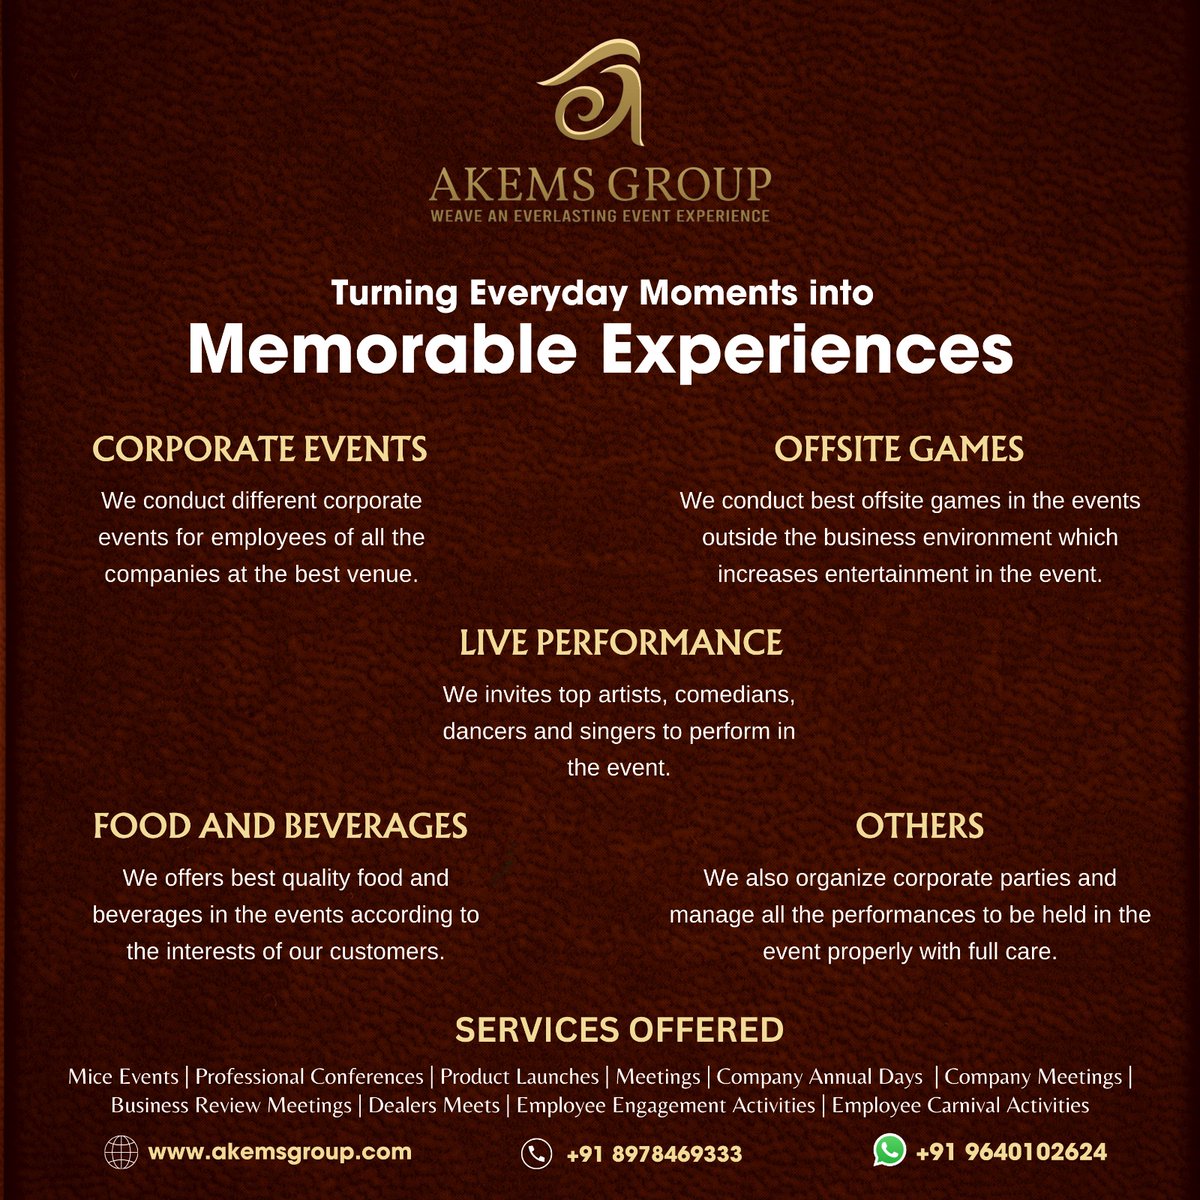 At Akems Group, we specialize in turning everyday moments into cherished memories and unforgettable experiences! 🎉✨ 

#AkemsGroup #MemorableMoments #EventExperiences #EventManagement #UnforgettableExperiences #EventPlanning #CorporateEvents #Celebrations #EventExcellence